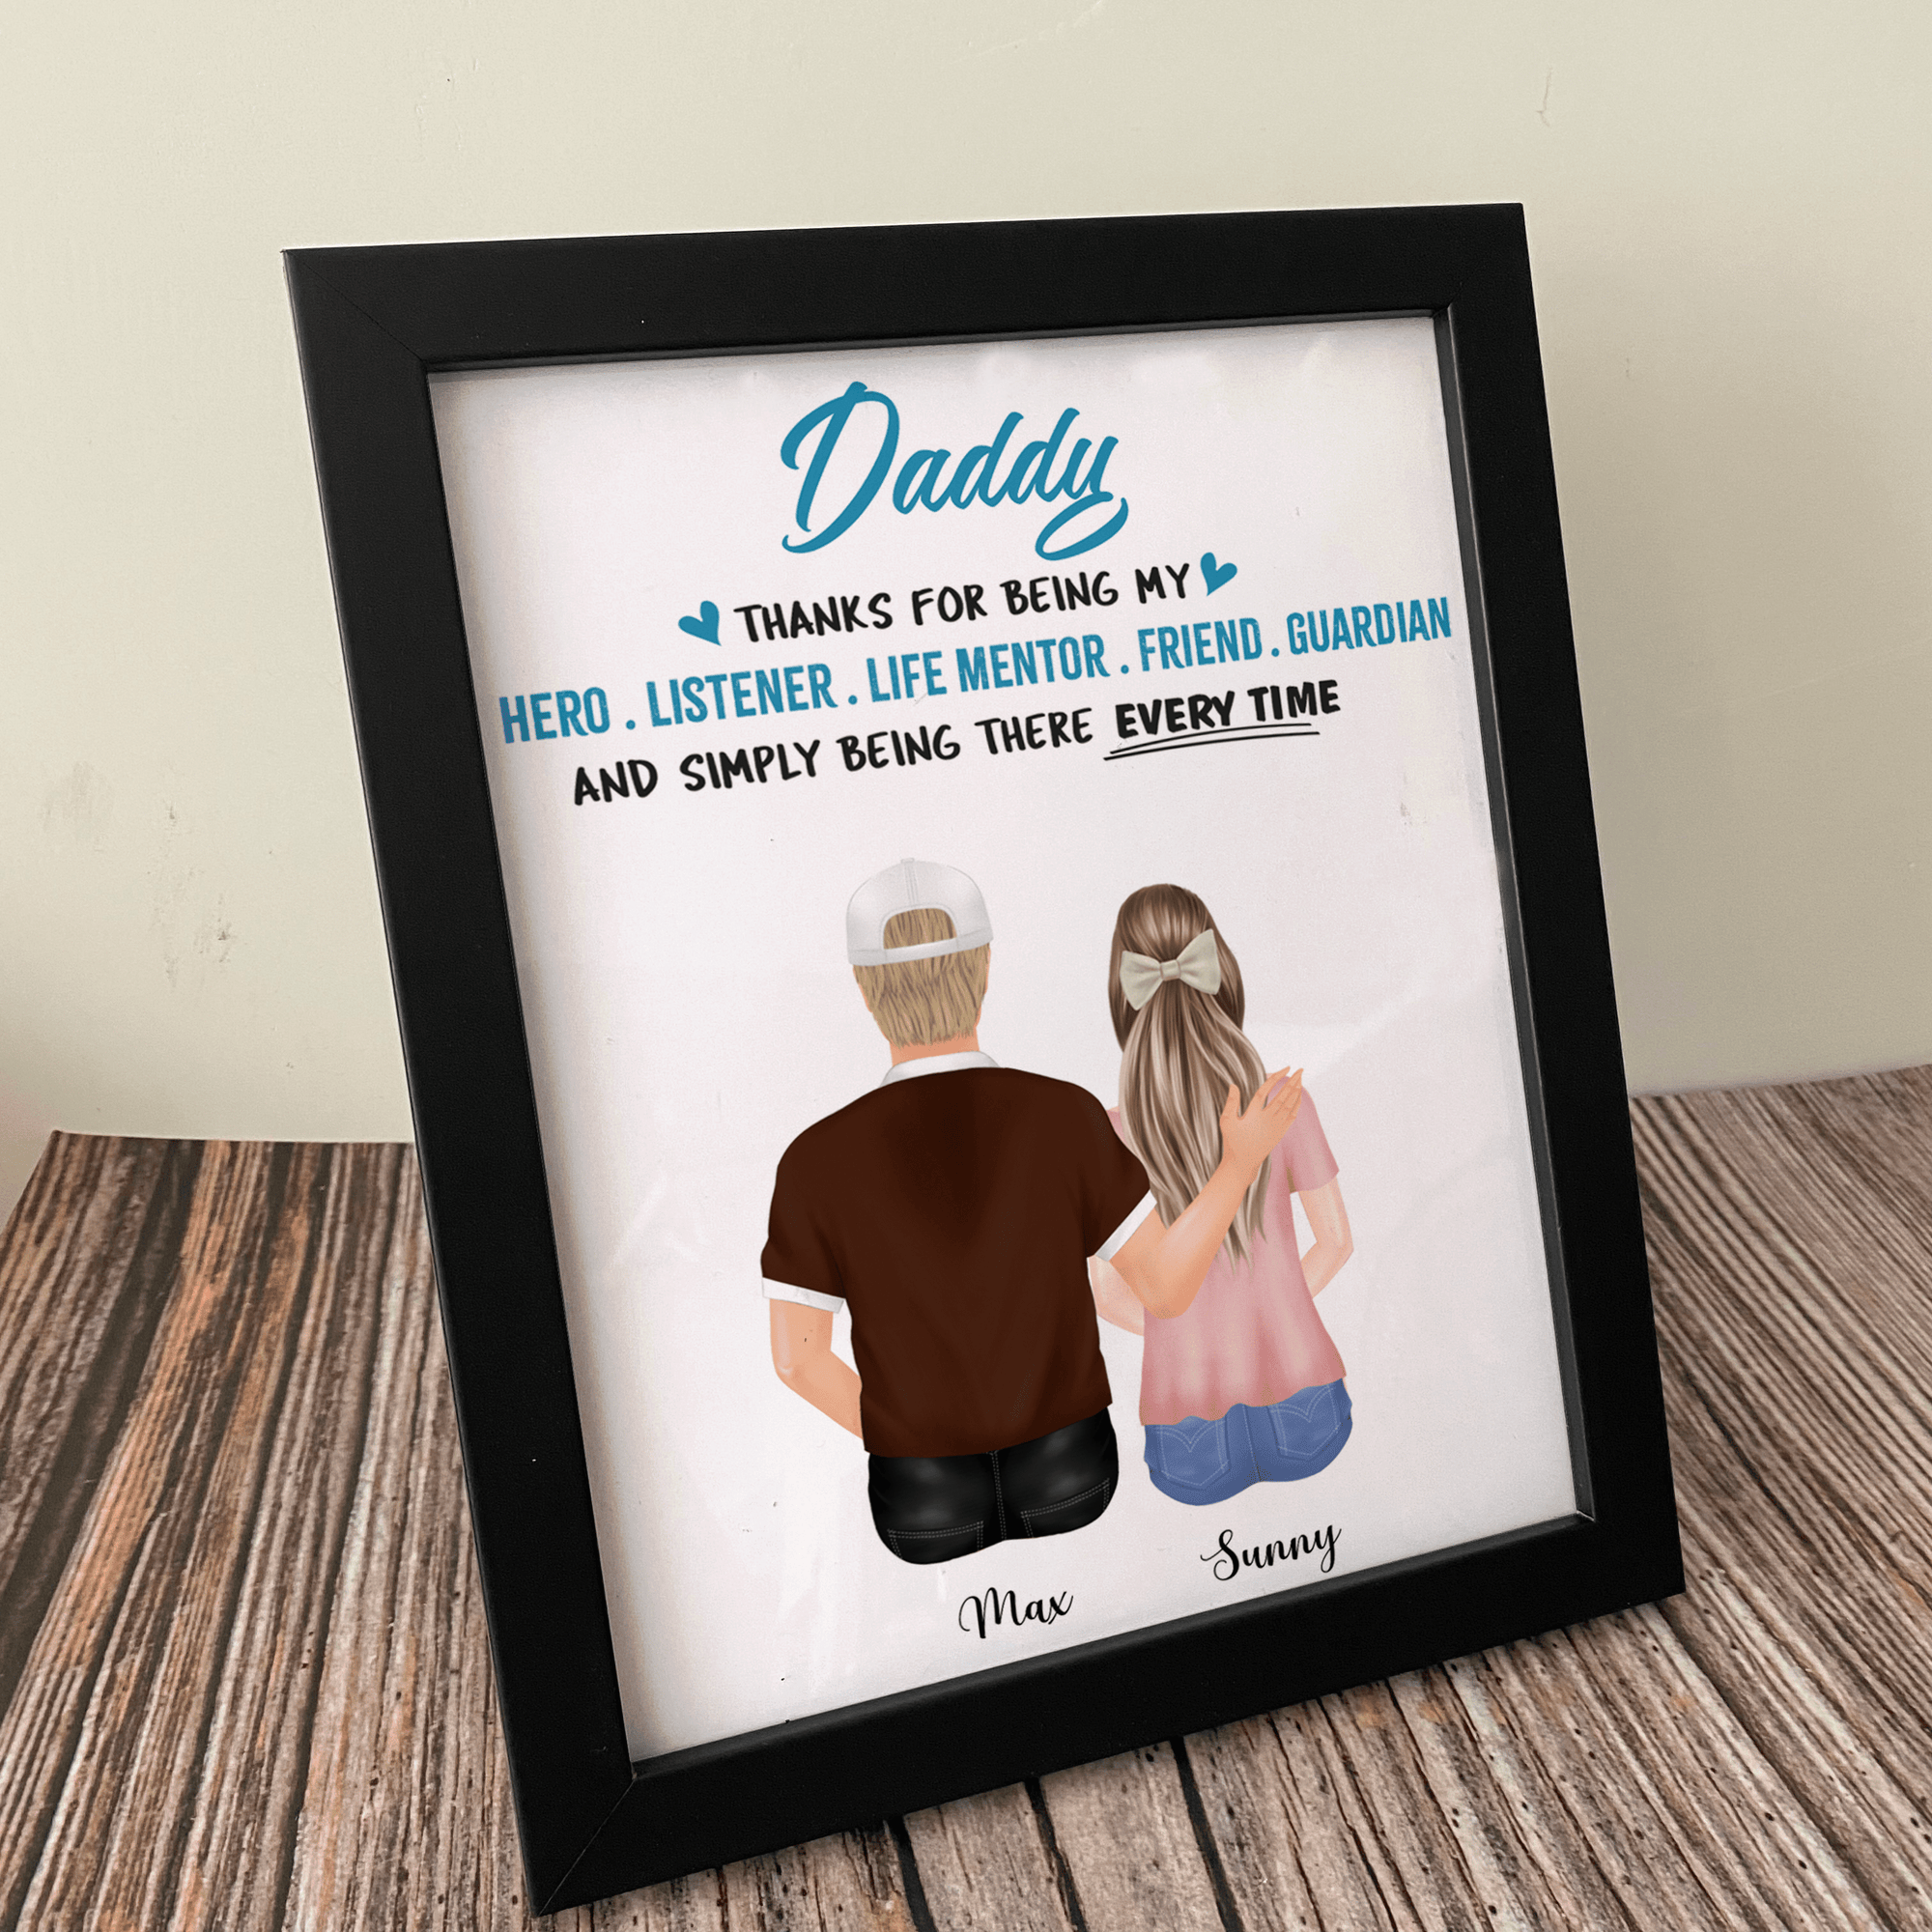 GeckoCustom Personalized Dad and Daughter Picture Frame, Thanks For Being My Hero Listener, Gift For Dad & Grandpa 8"x10"